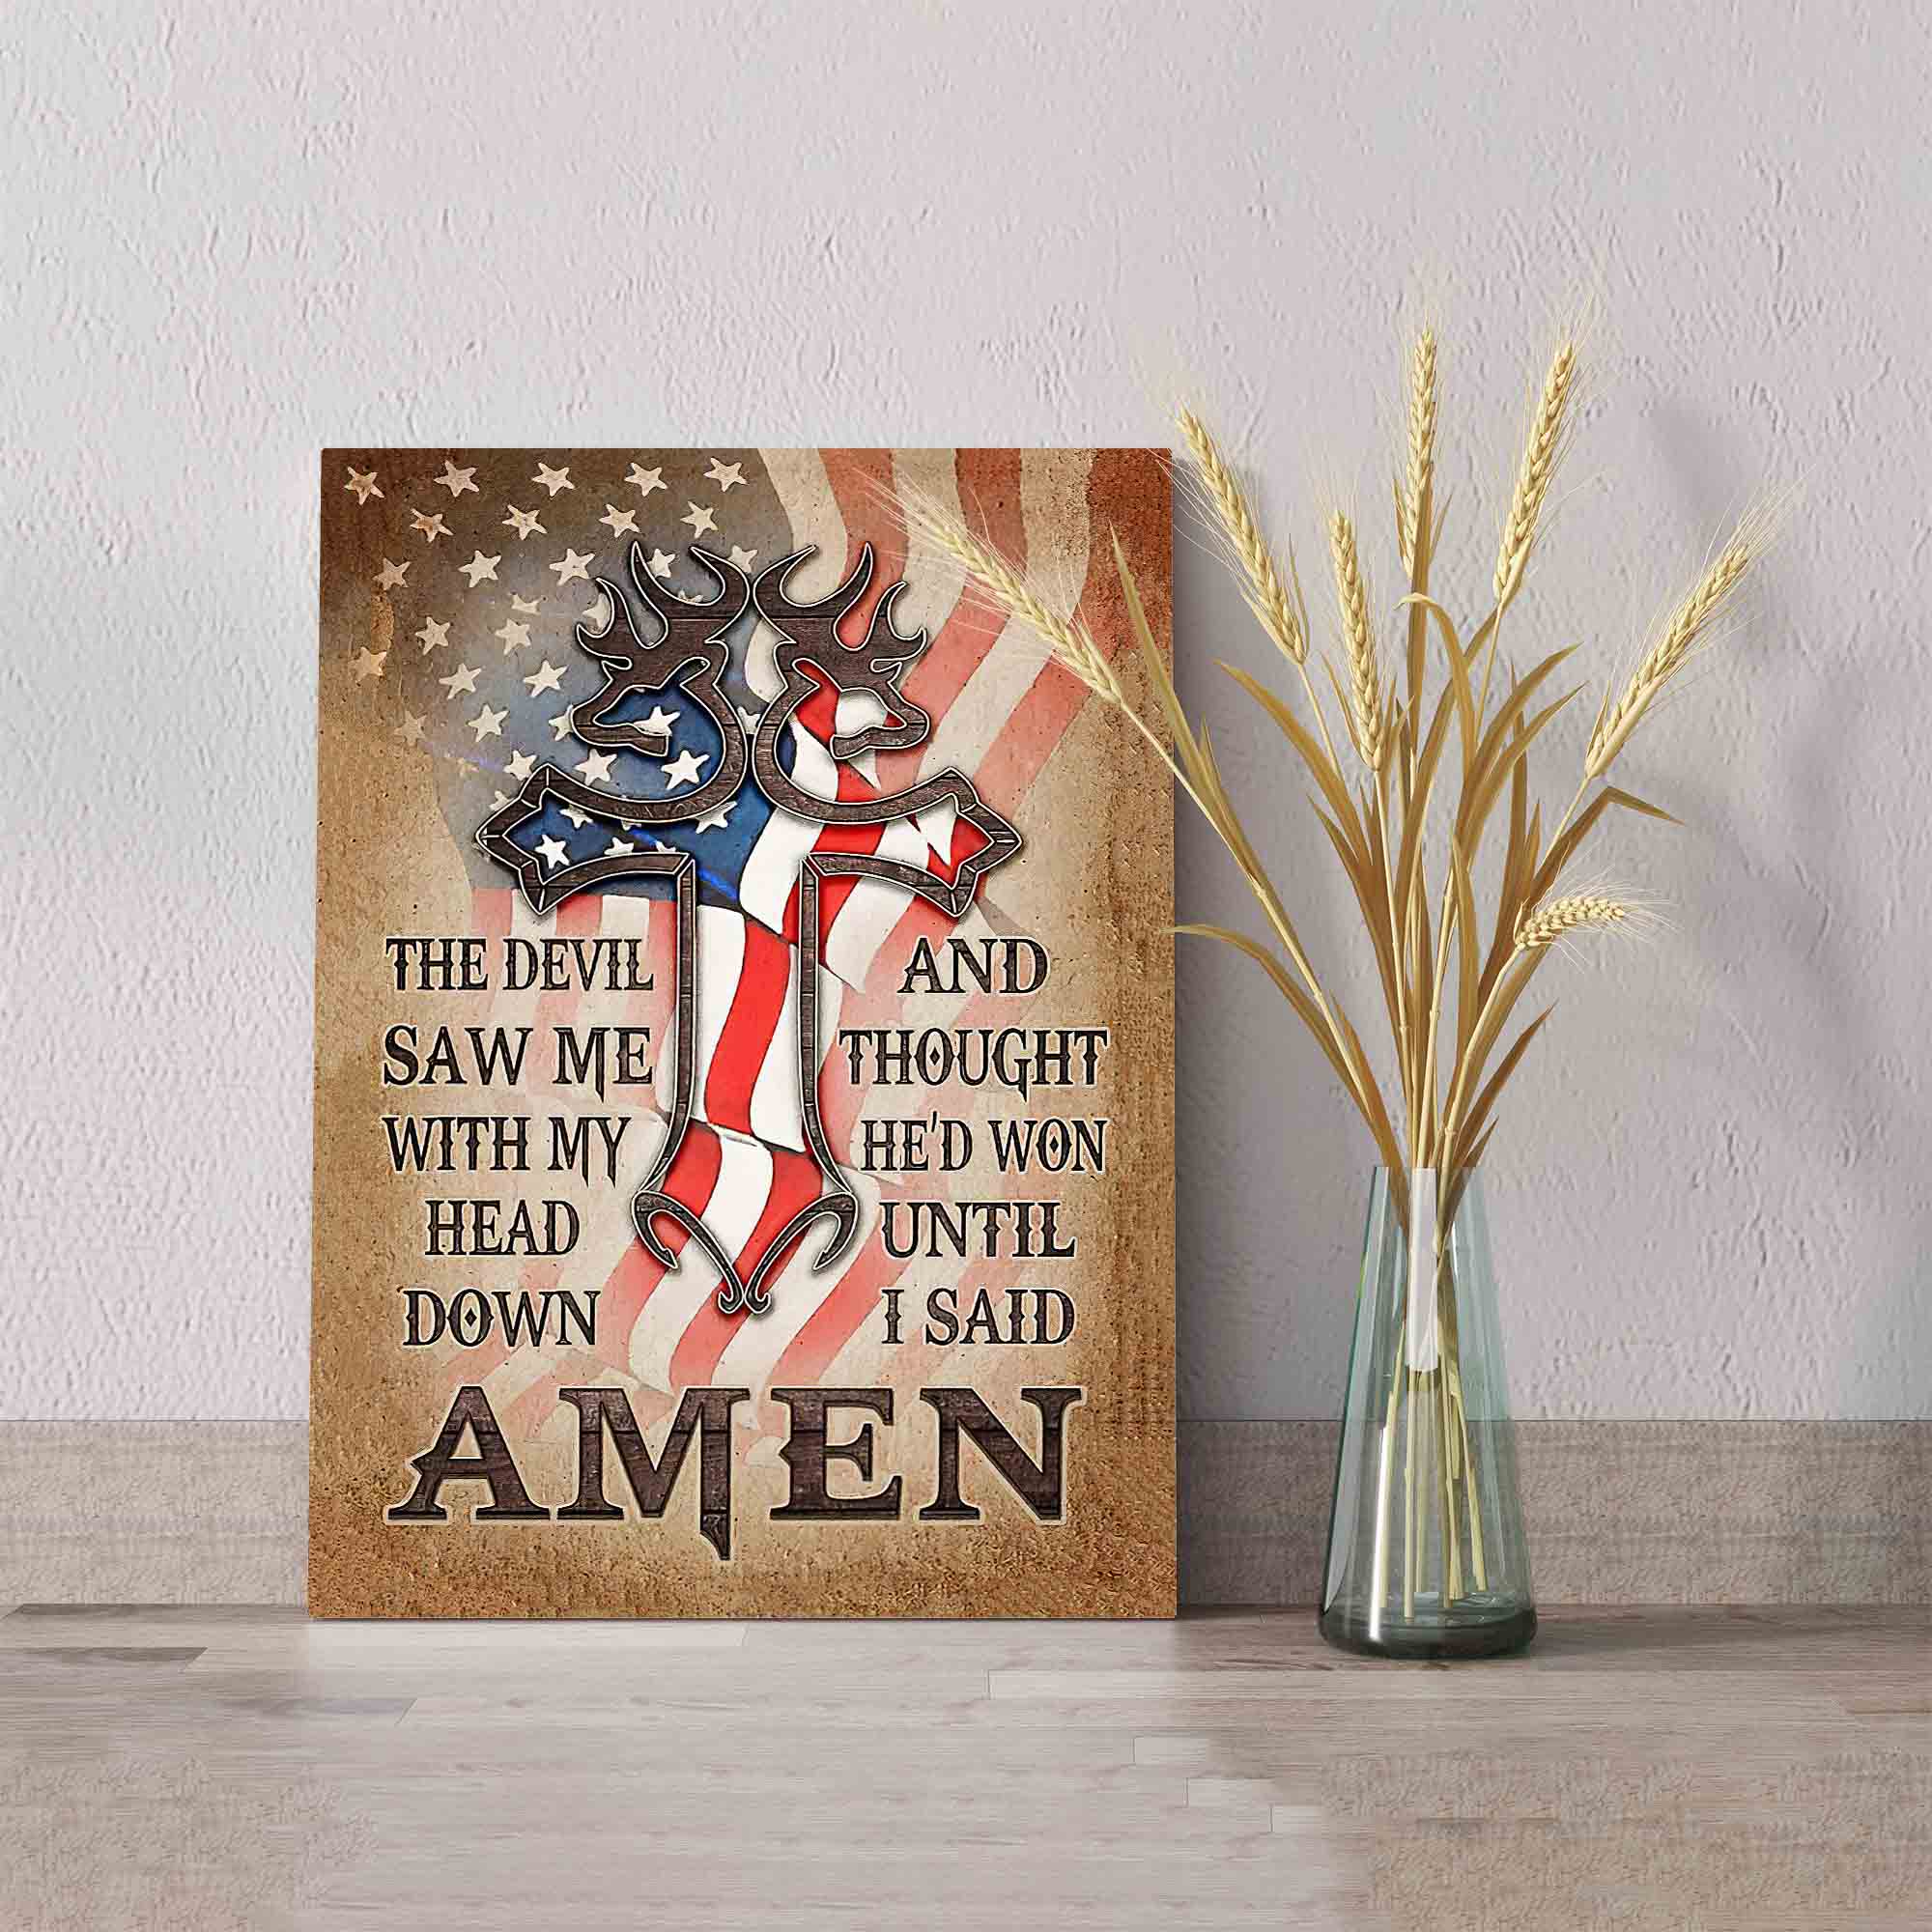 The Devil Saw Me With My Head Down Canvas, Cross Canvas, American Flag Canvas, Family Canvas, Canvas Wall Art